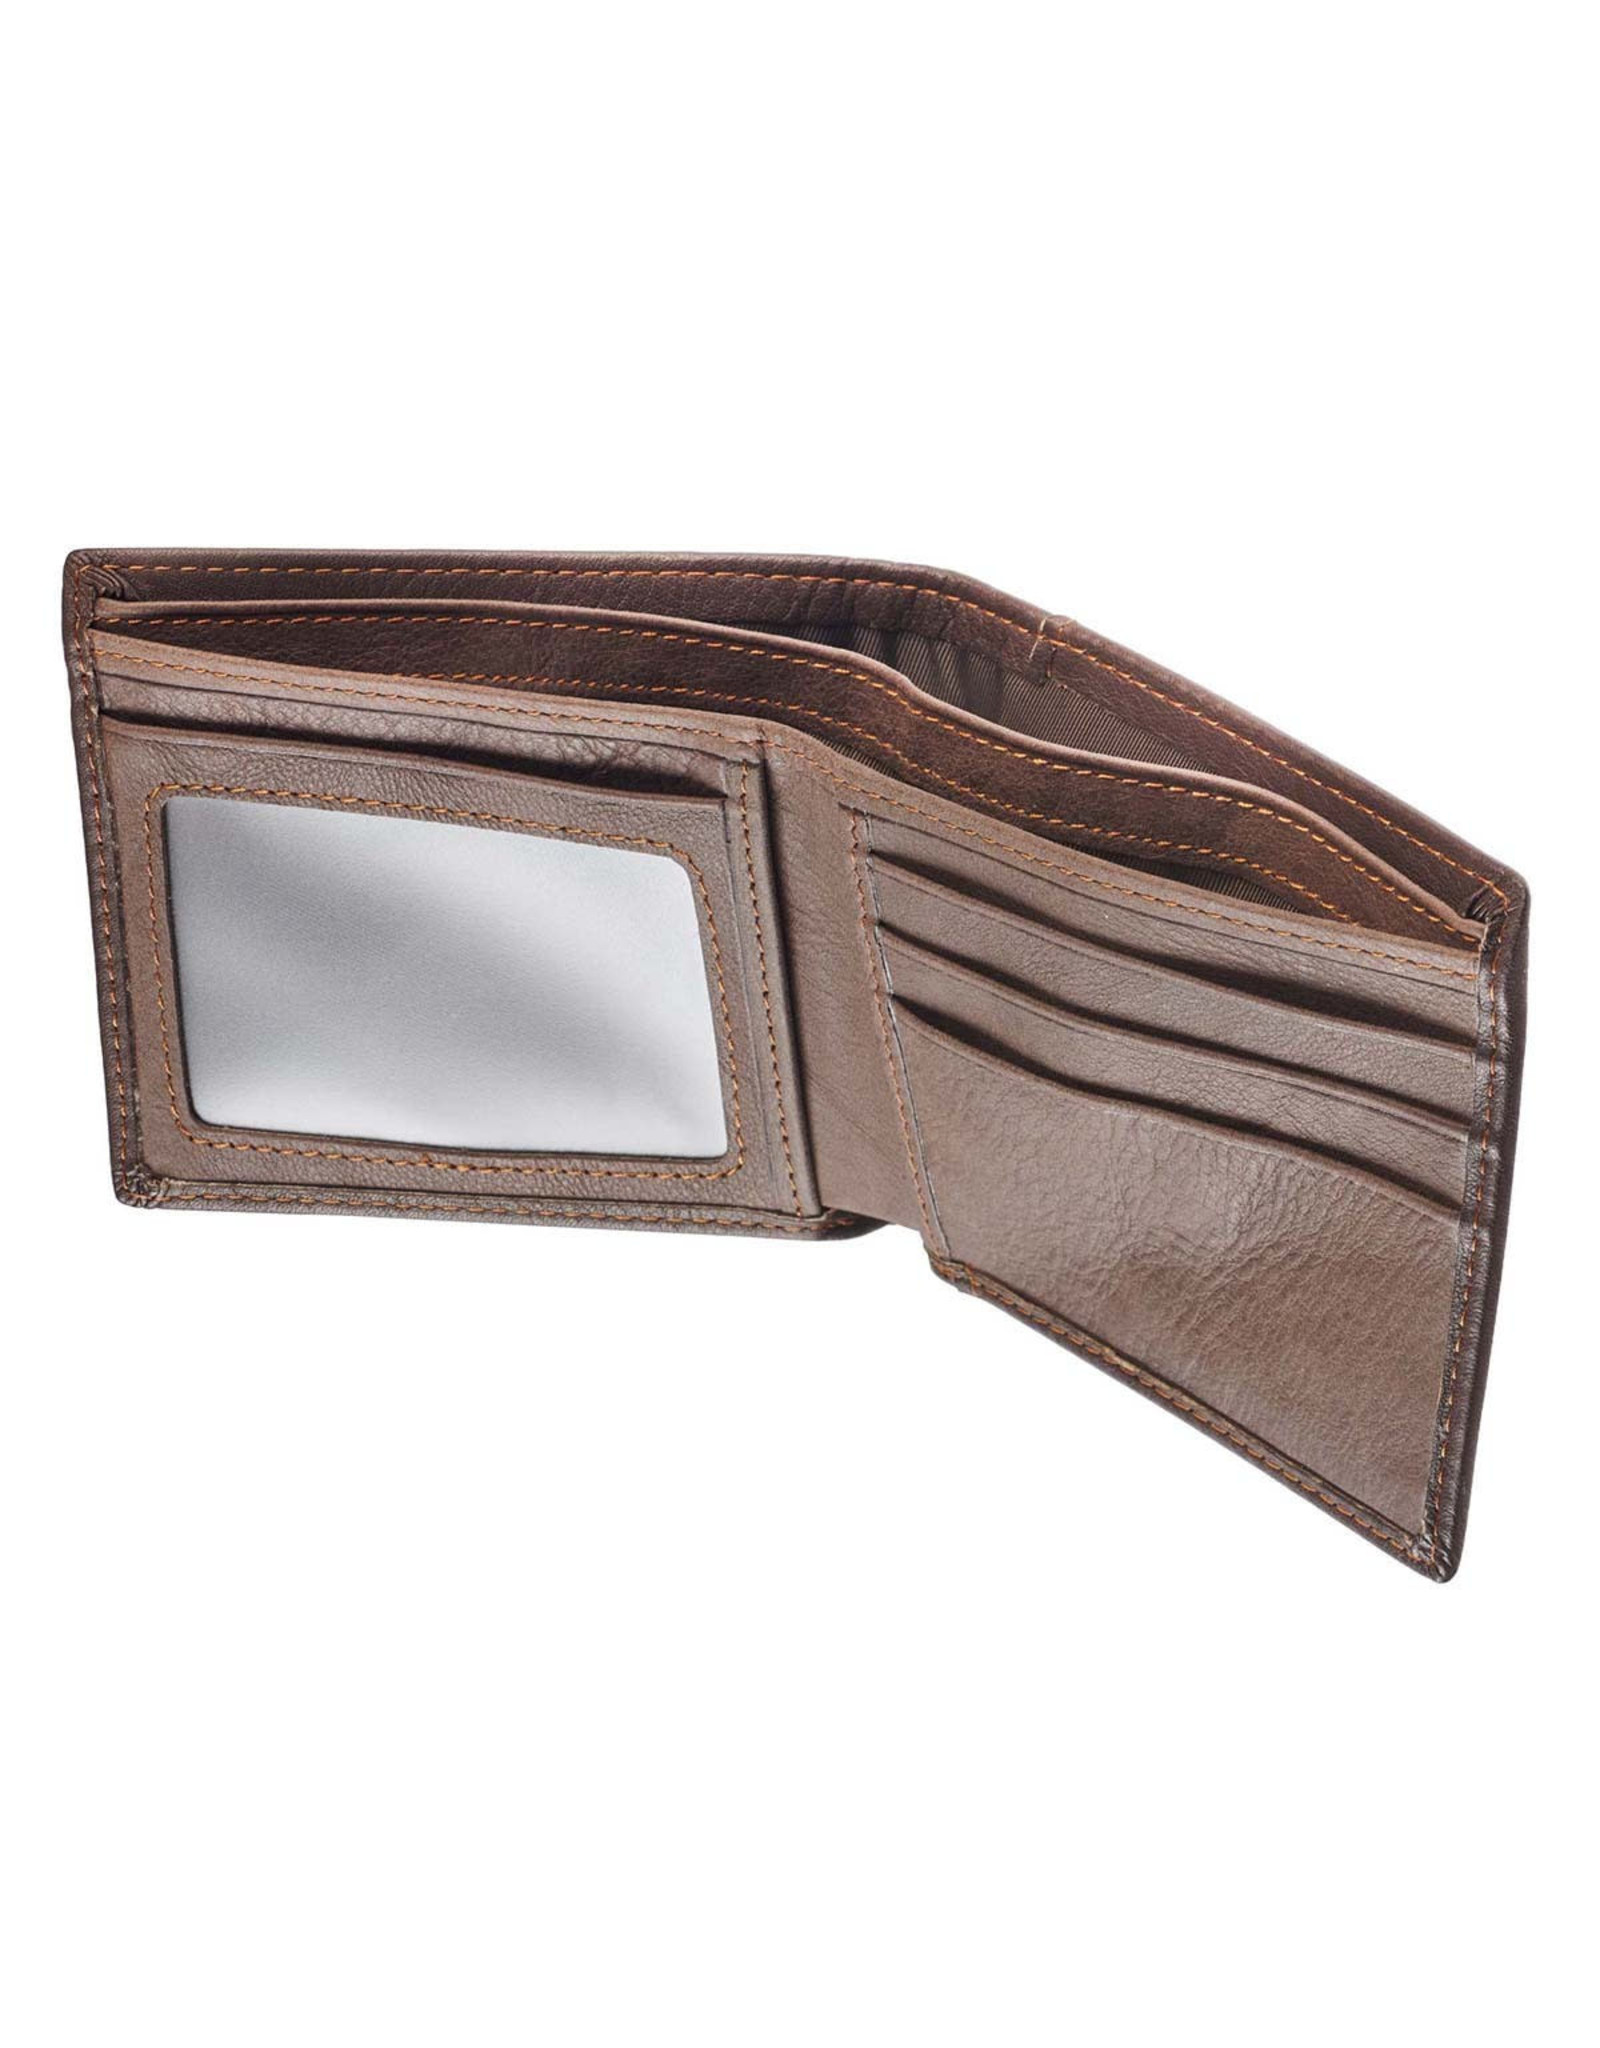 Wallet - Blessed Man, Leather - Jeremiah 17:7